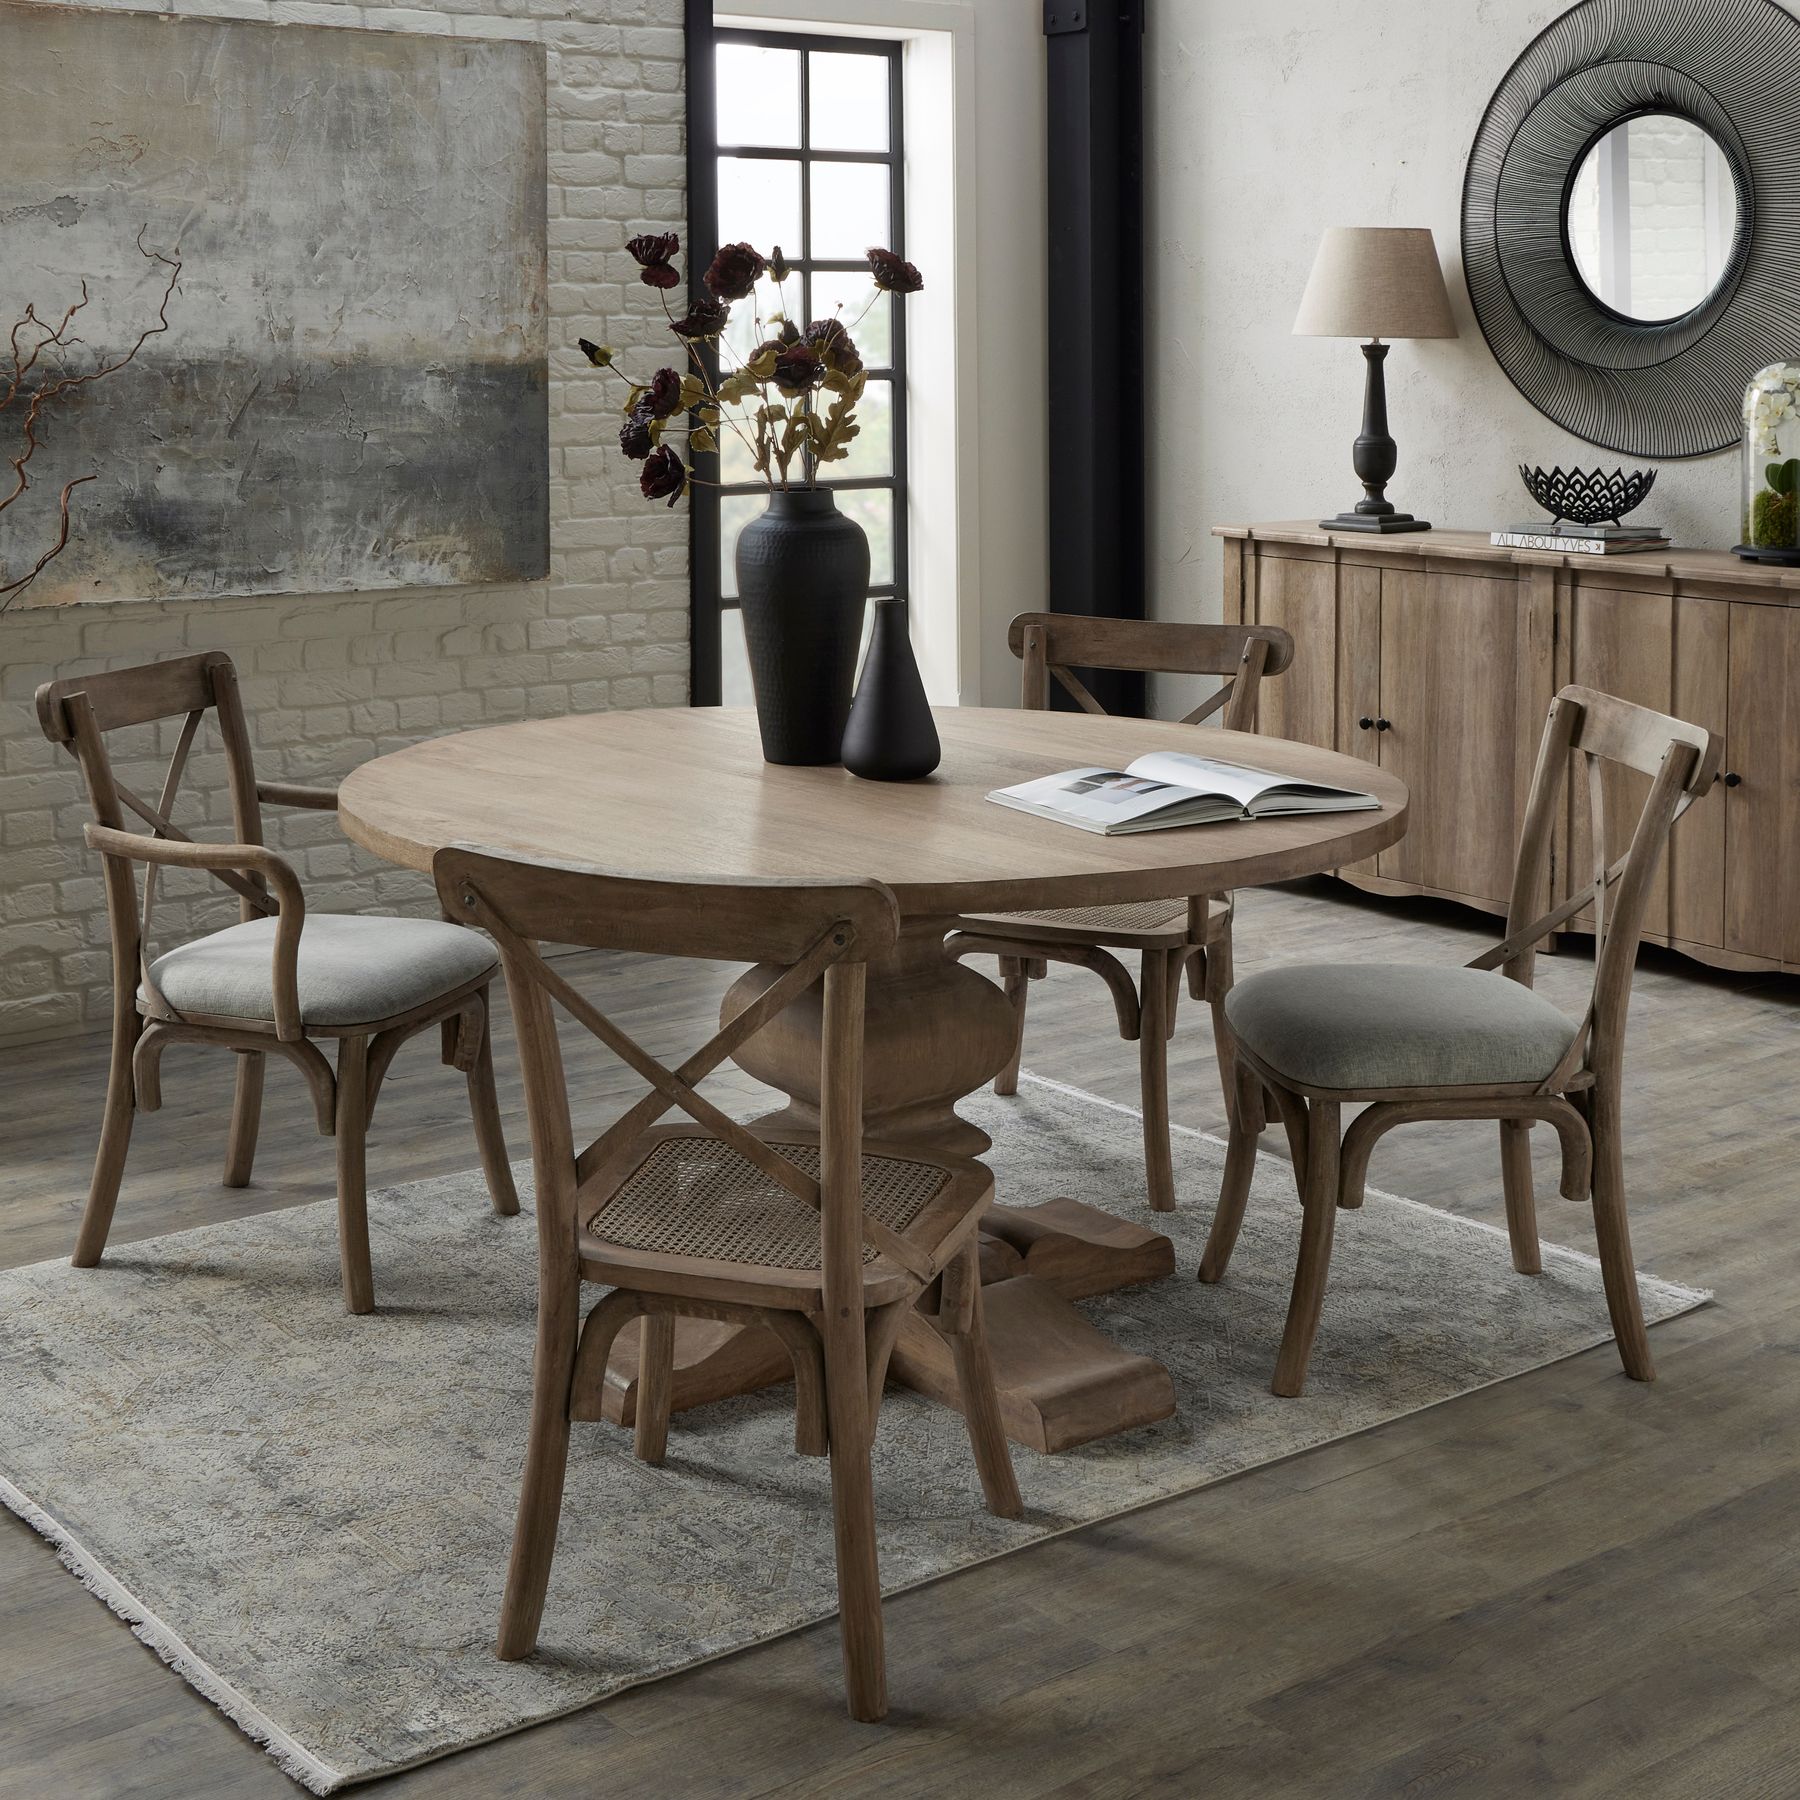 Copgrove Collection Round Pedestal Dining Table - Image 5